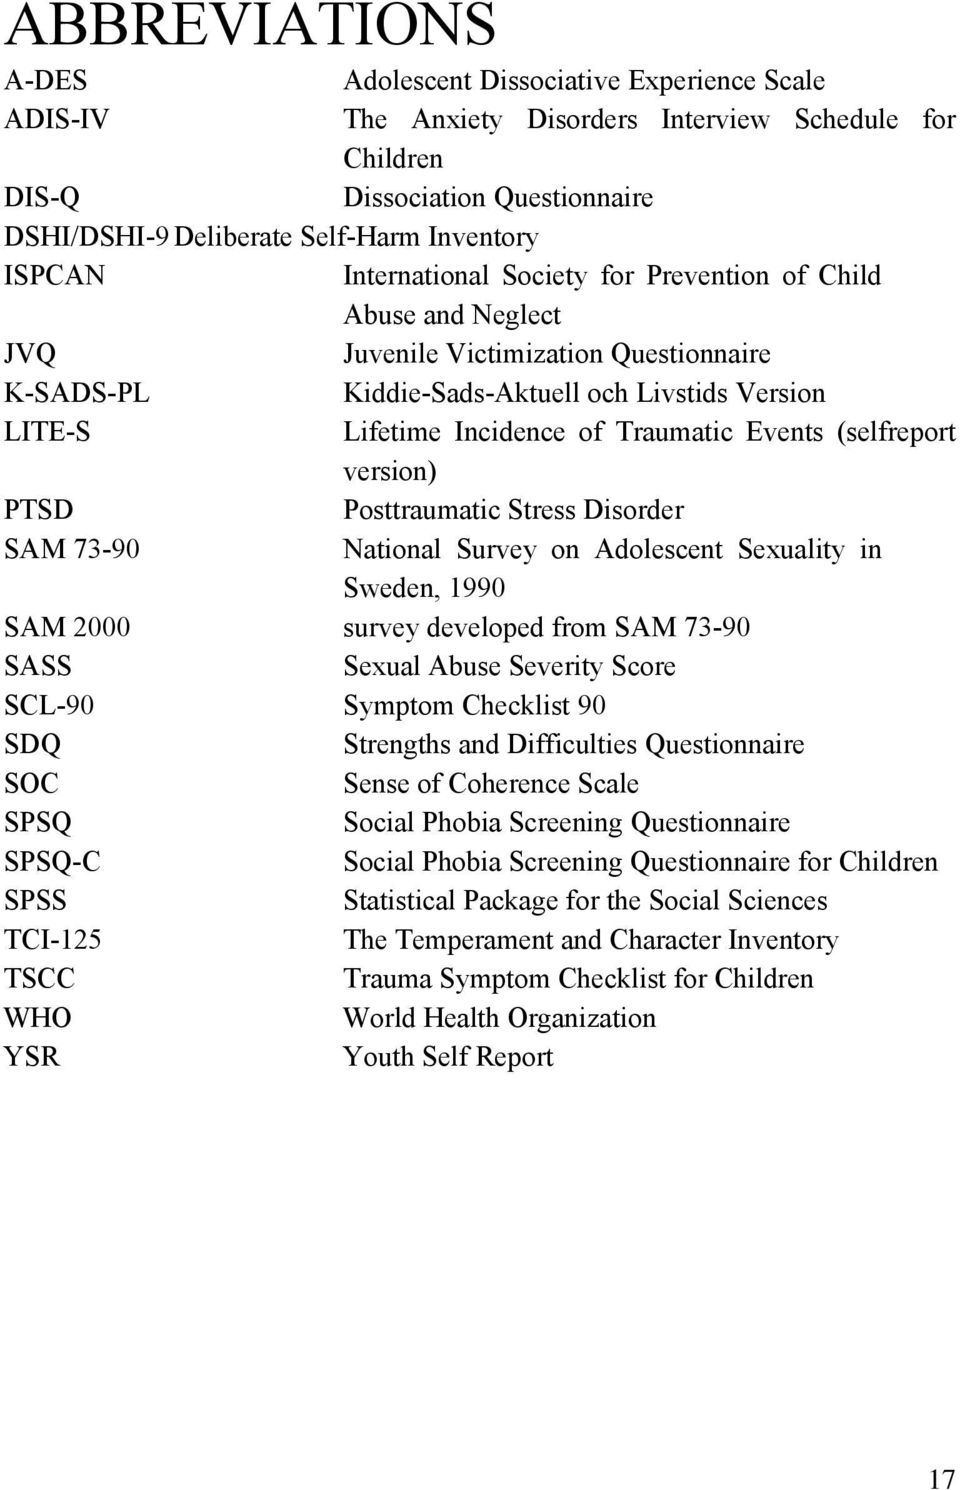 Traumatic Events (selfreport version) PTSD Posttraumatic Stress Disorder SAM 73-90 National Survey on Adolescent Sexuality in Sweden, 1990 SAM 2000 survey developed from SAM 73-90 SASS Sexual Abuse